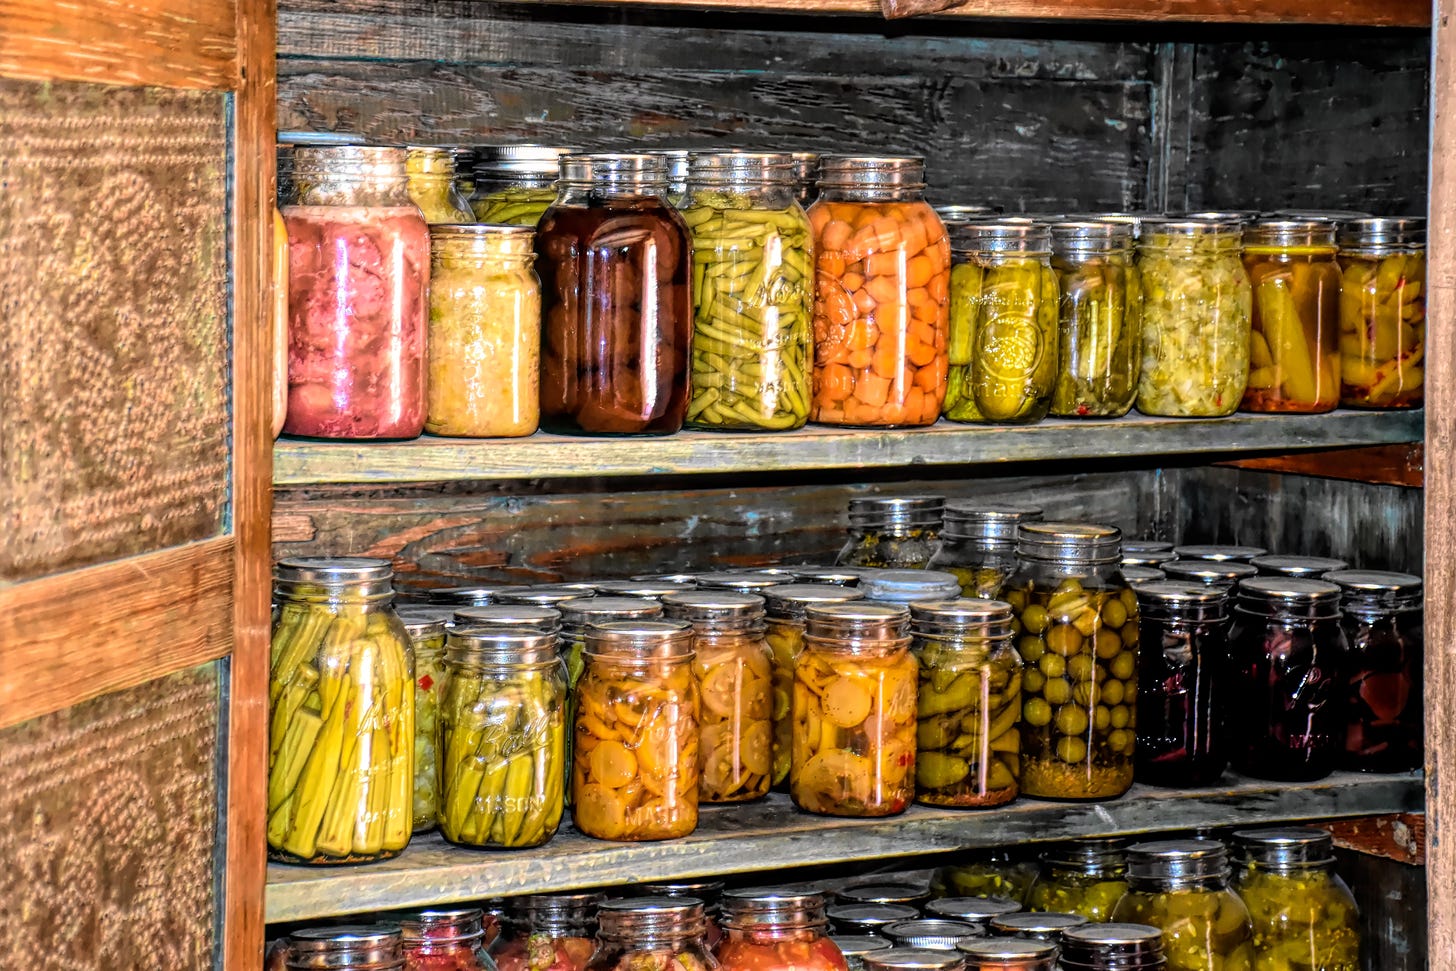 Two wooden shelves are stacked with dozens of glass jars filled with pickles and preserves